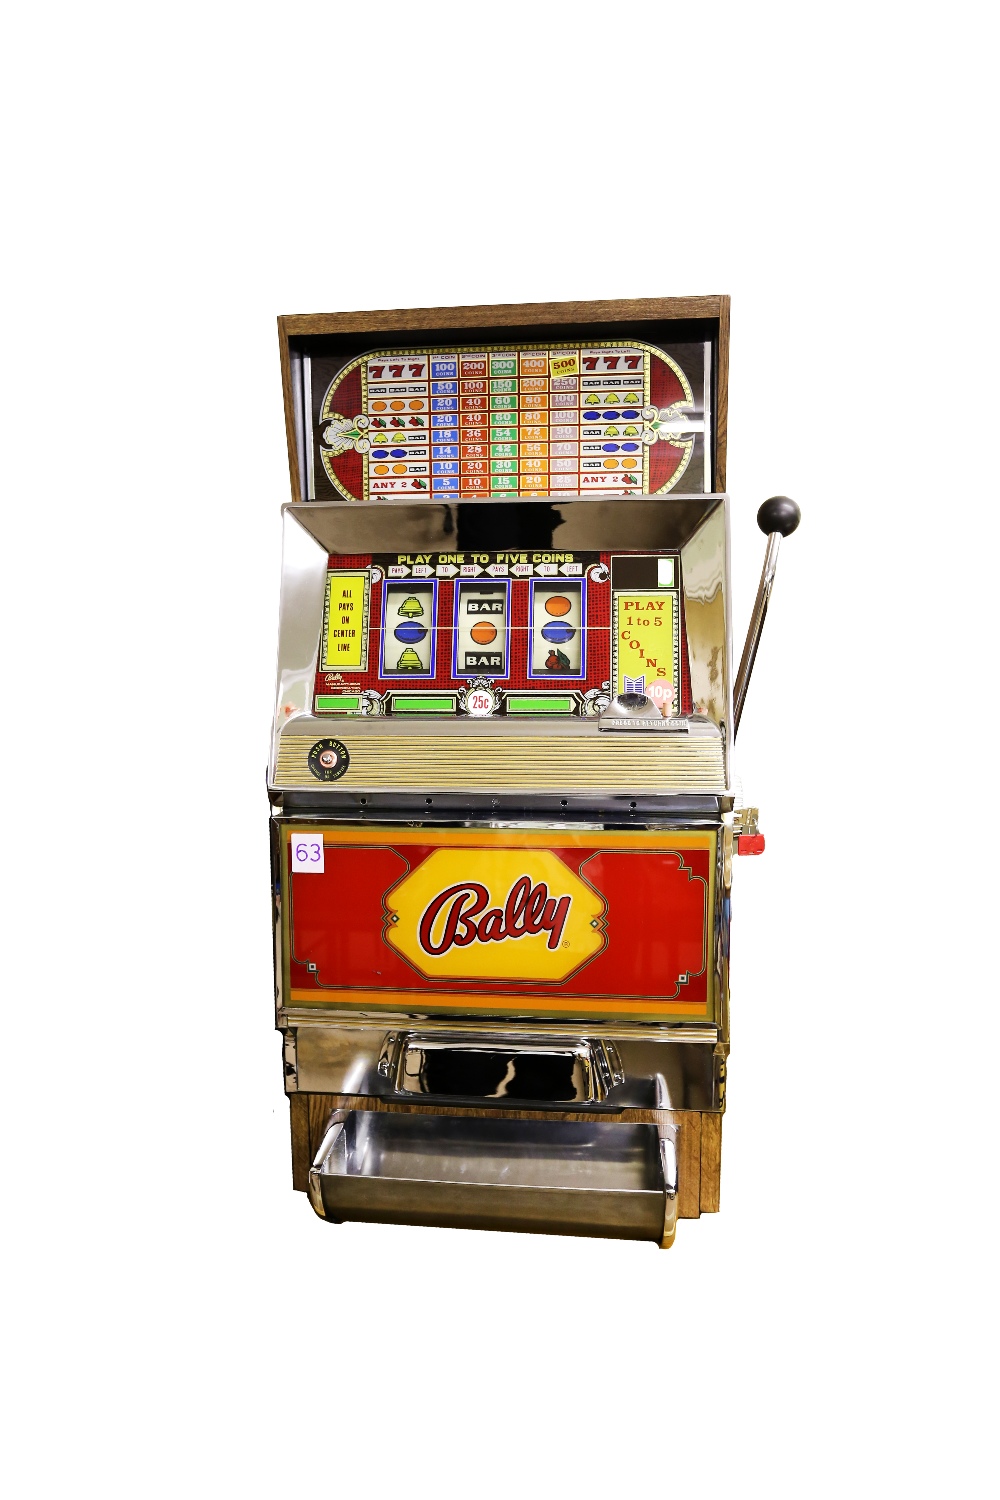 Bally Manufacturing Company 5 Coin Multiplier 1975 One Arm Bandit. The Bally Multiplier was never